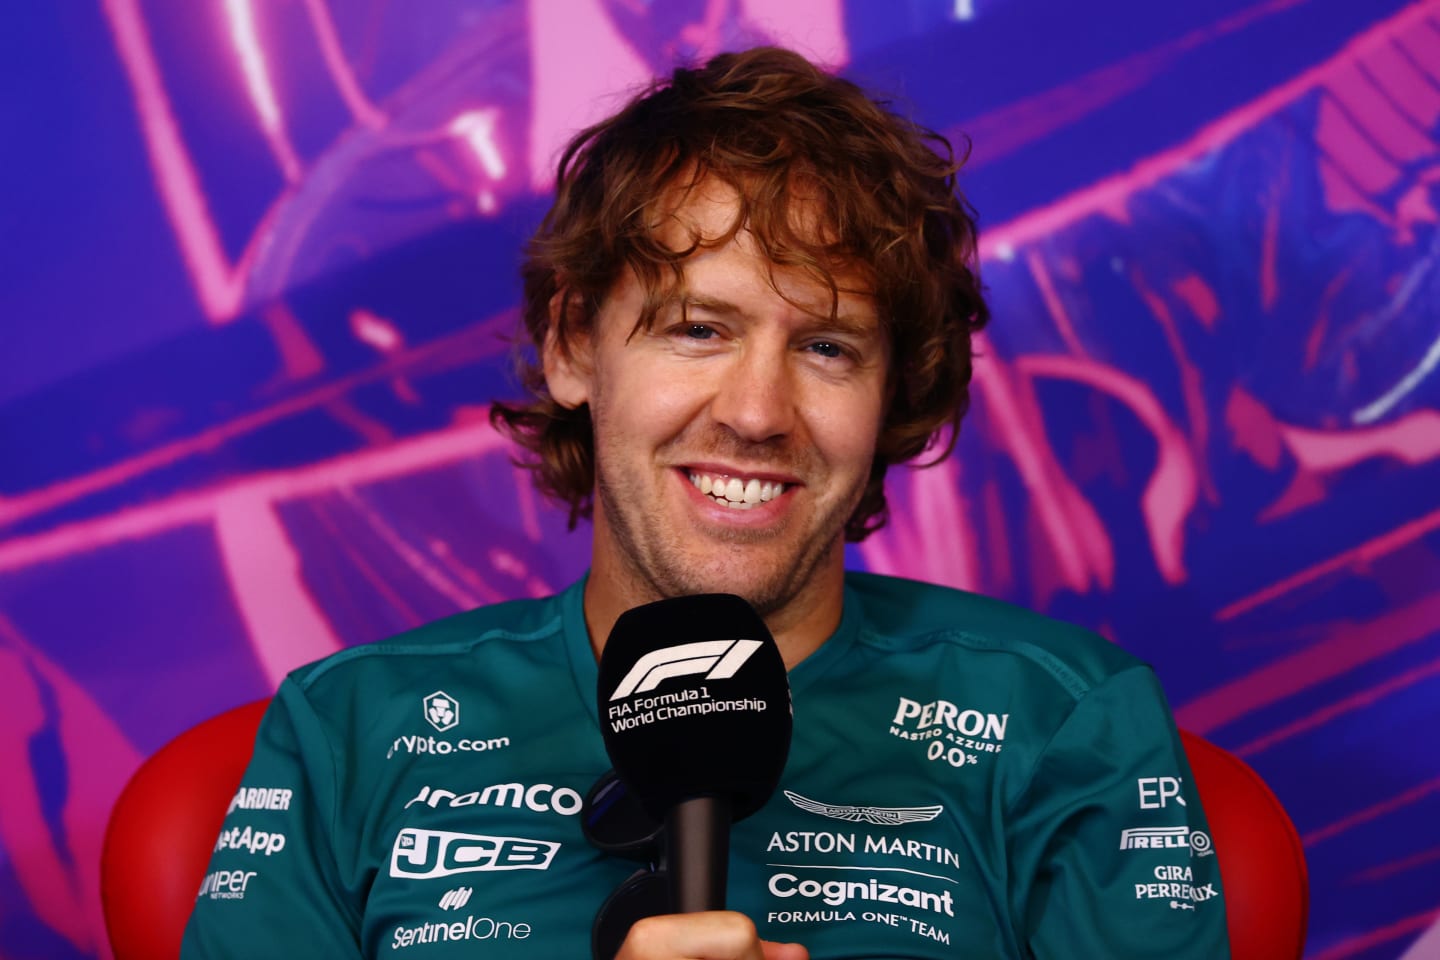 MONTREAL, QUEBEC - JUNE 17: Sebastian Vettel of Germany and Aston Martin F1 Team talks in the Drivers Press Conference prior to practice ahead of the F1 Grand Prix of Canada at Circuit Gilles Villeneuve on June 17, 2022 in Montreal, Quebec. (Photo by Dan Istitene/Getty Images)